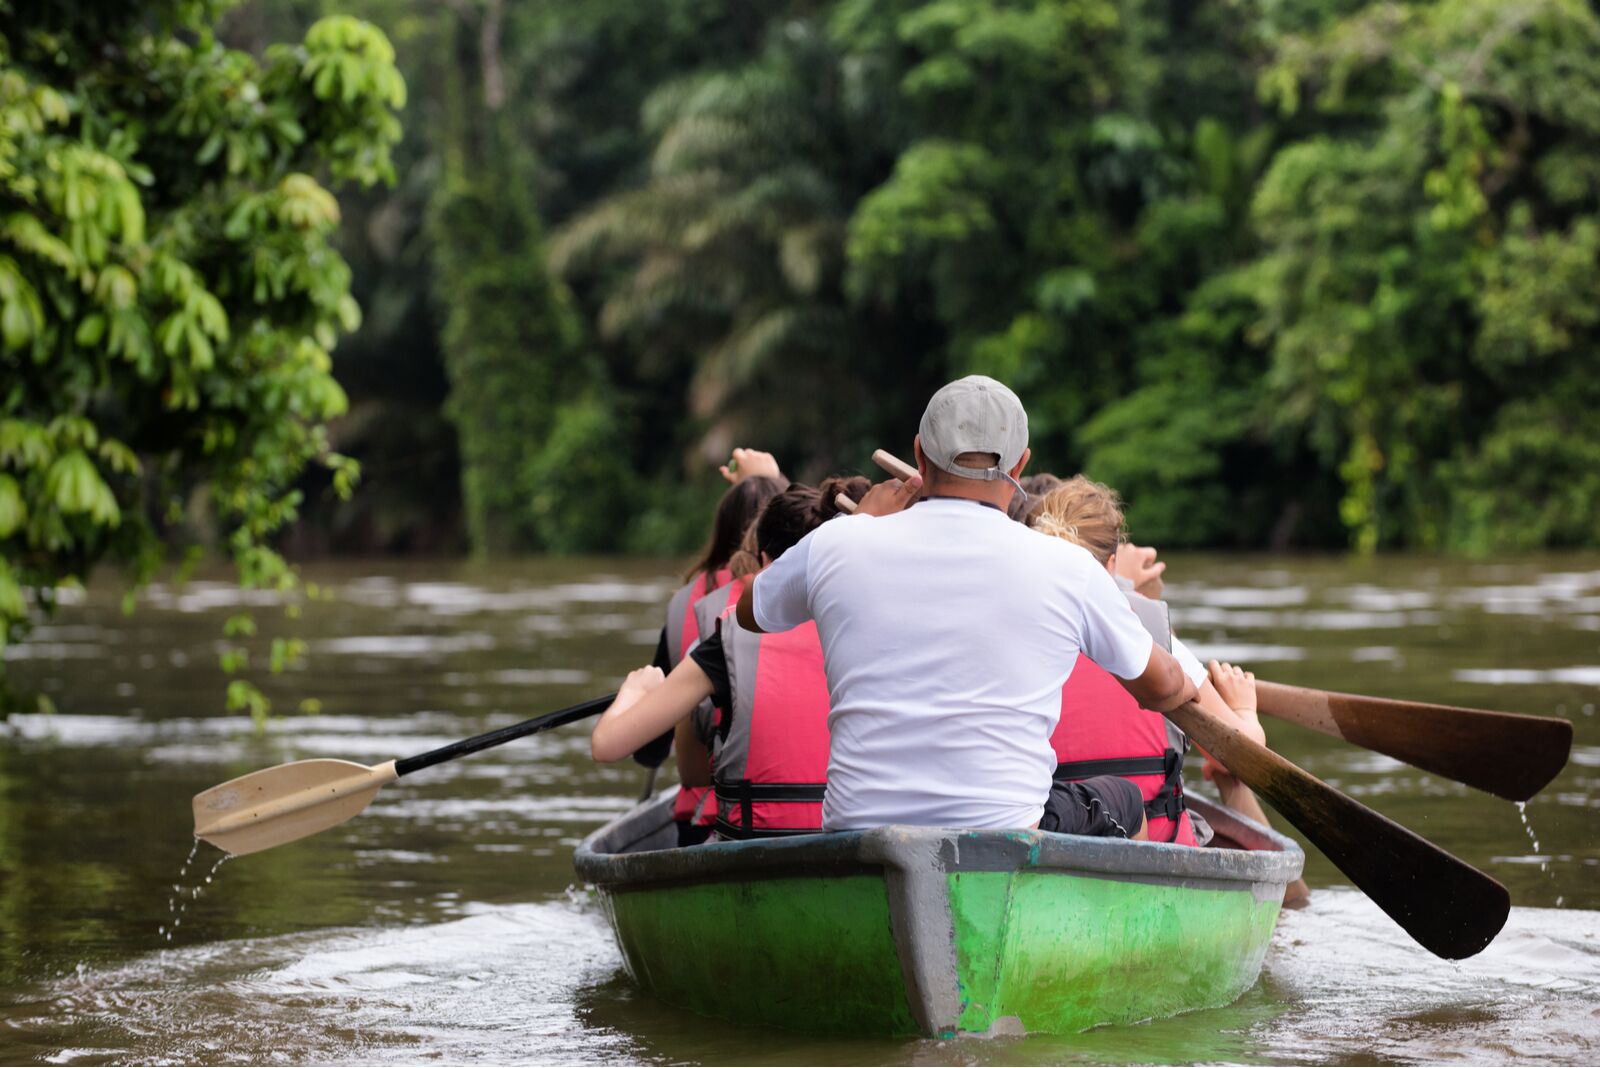 People exploring a wild nature area by rowing boat. Ecotourism concept. Tortuguero national park. Limon, Costa Rica.